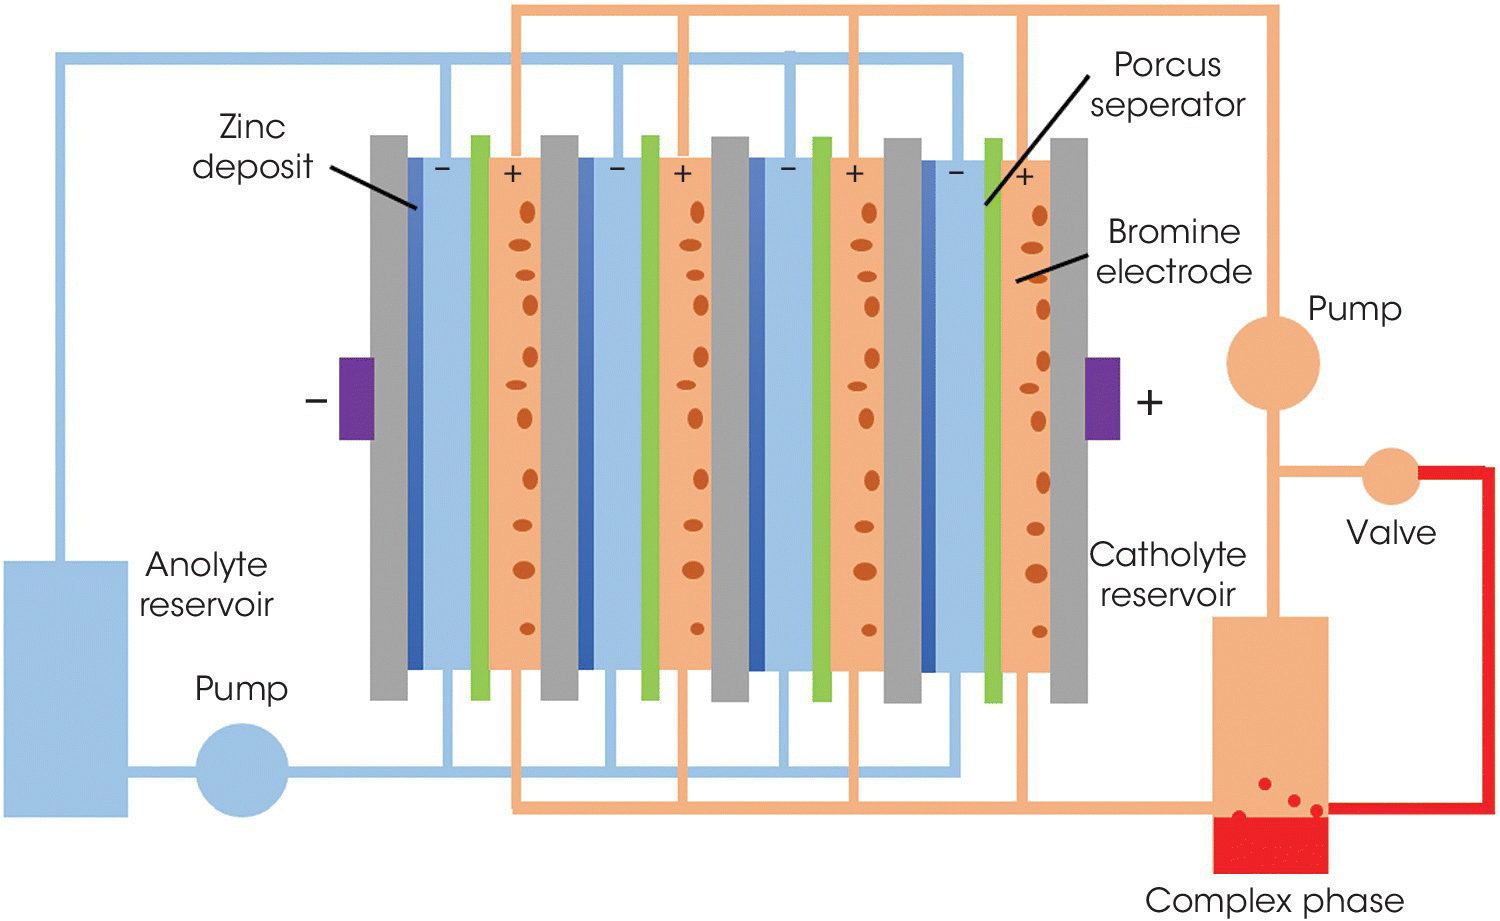 Schematic of a flow‐assisted battery composed of the anolyte reservoir, 2 pumps, porcus separator, catholyte reservoir, and valve. Line depicts zinc deposit and bromine electrode.